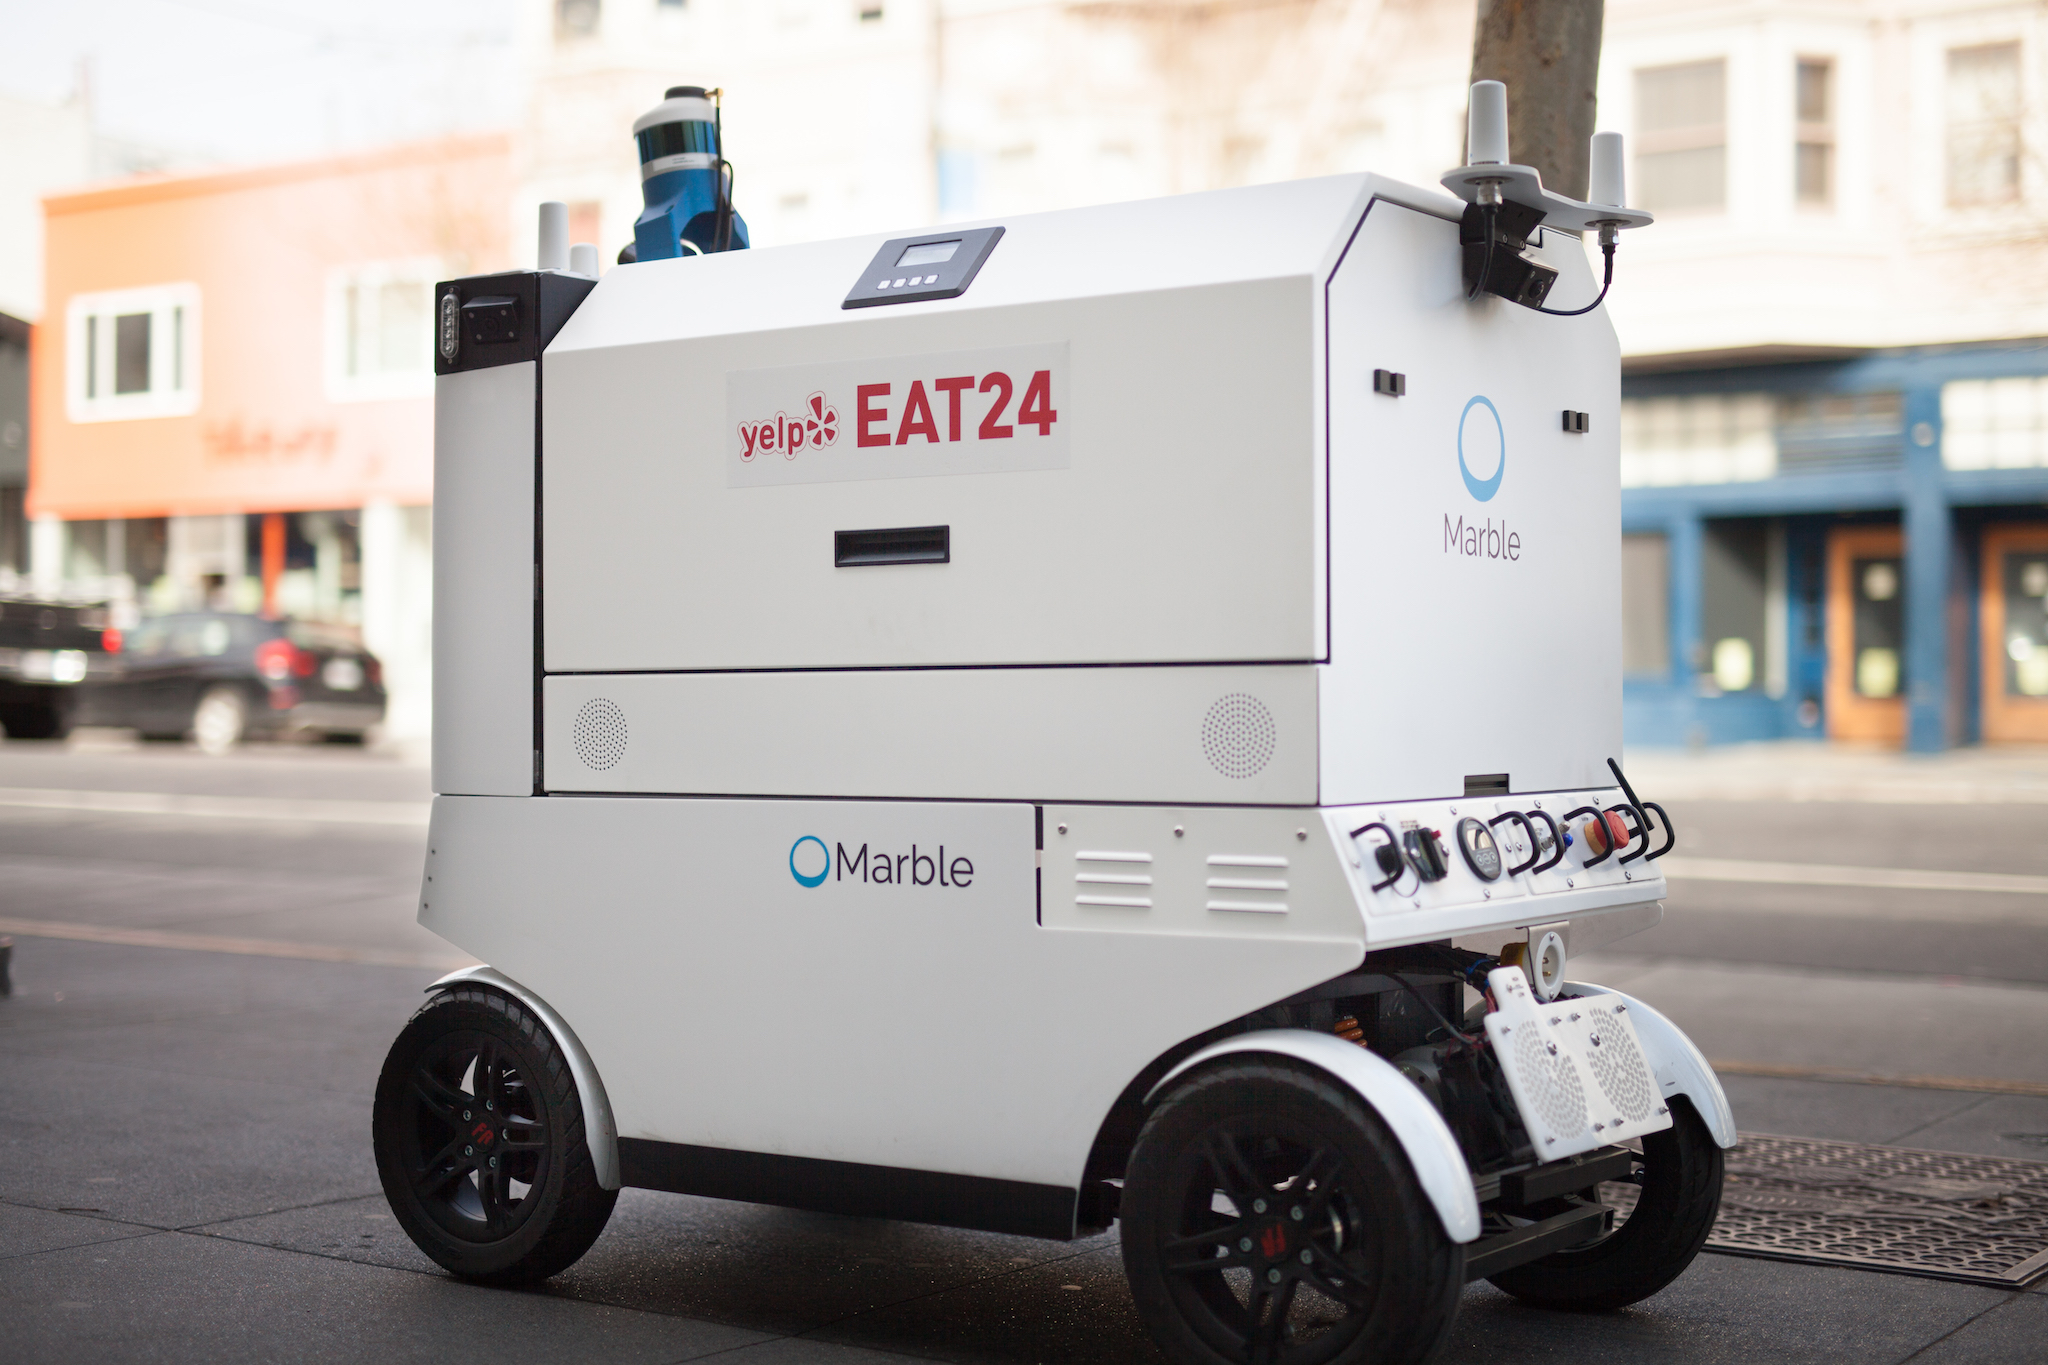 yelp_eat24_marble_2_delivery_robot.jpg